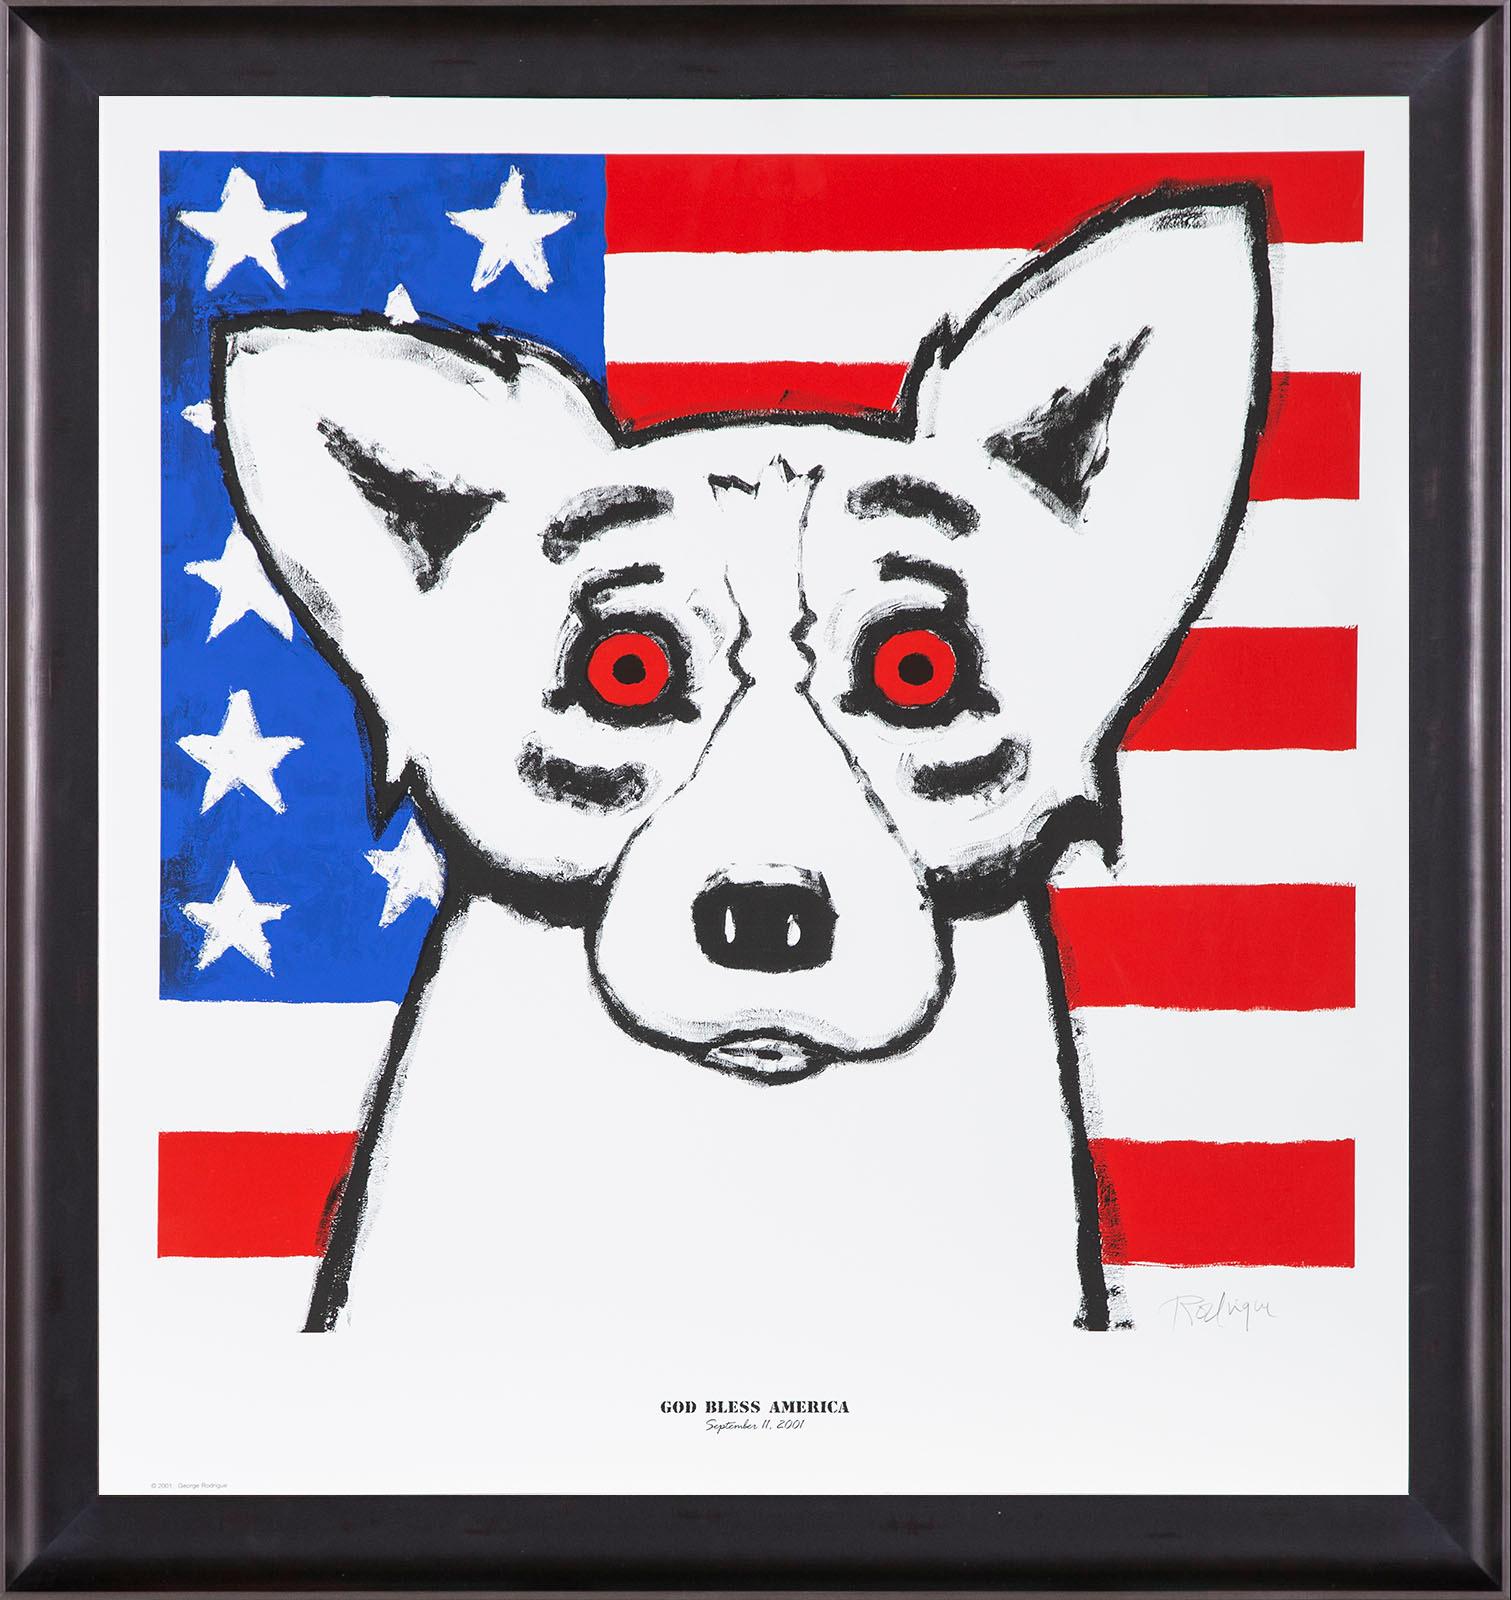 George Rodrigue – God Bless America, 2011
Silkscreen print
Edition: x/1000
Size: 23.5 x 23.875 inches
Signed lower right and numbered lower left
Certificate of Authenticity included

A painter who emerged in the 1960s with dark and lush landscapes